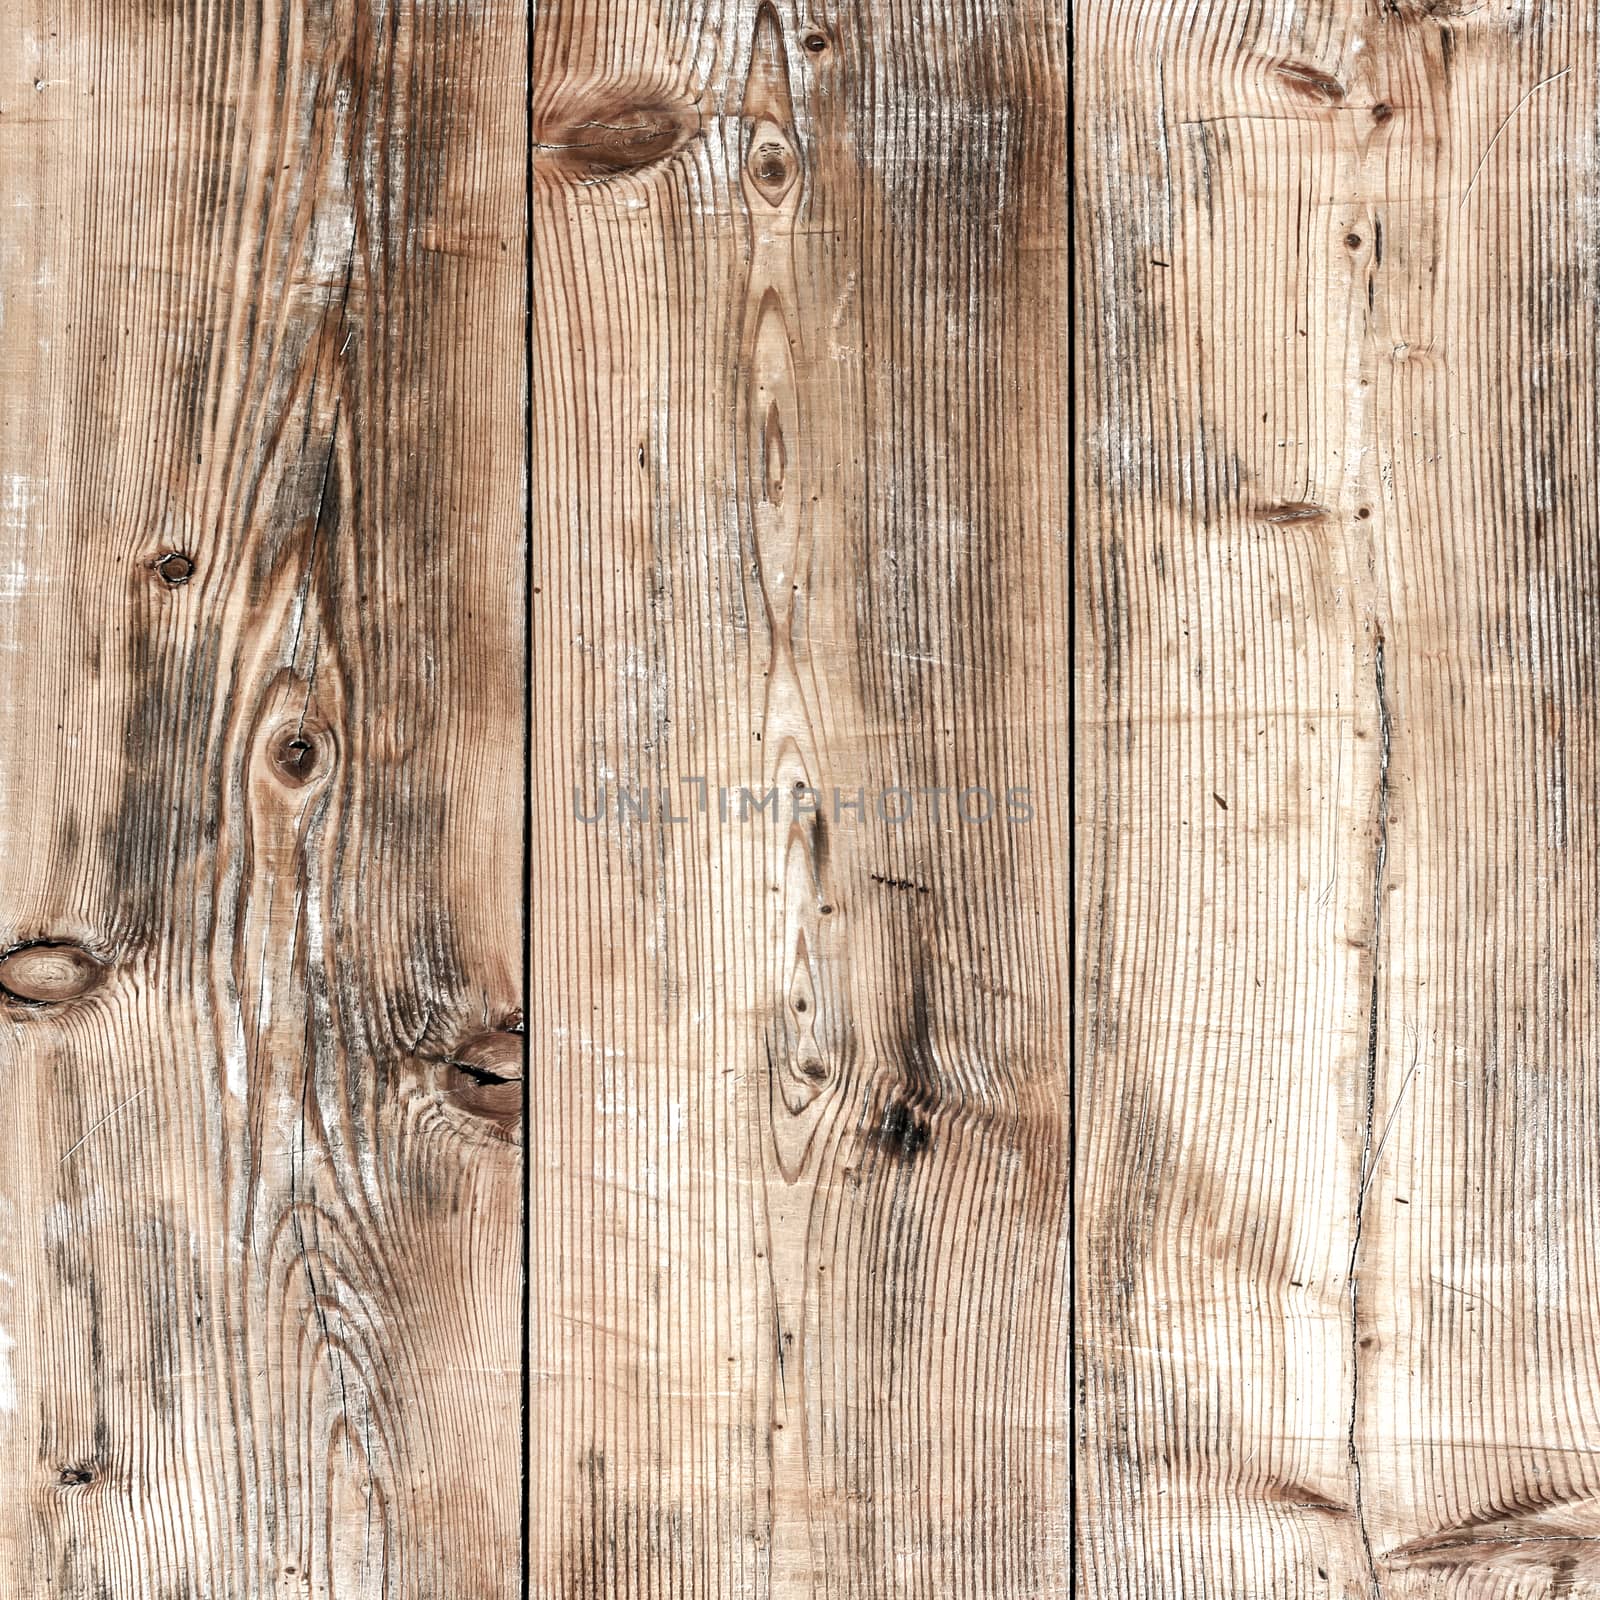 Close-up of the three old wooden boards vertically arranged